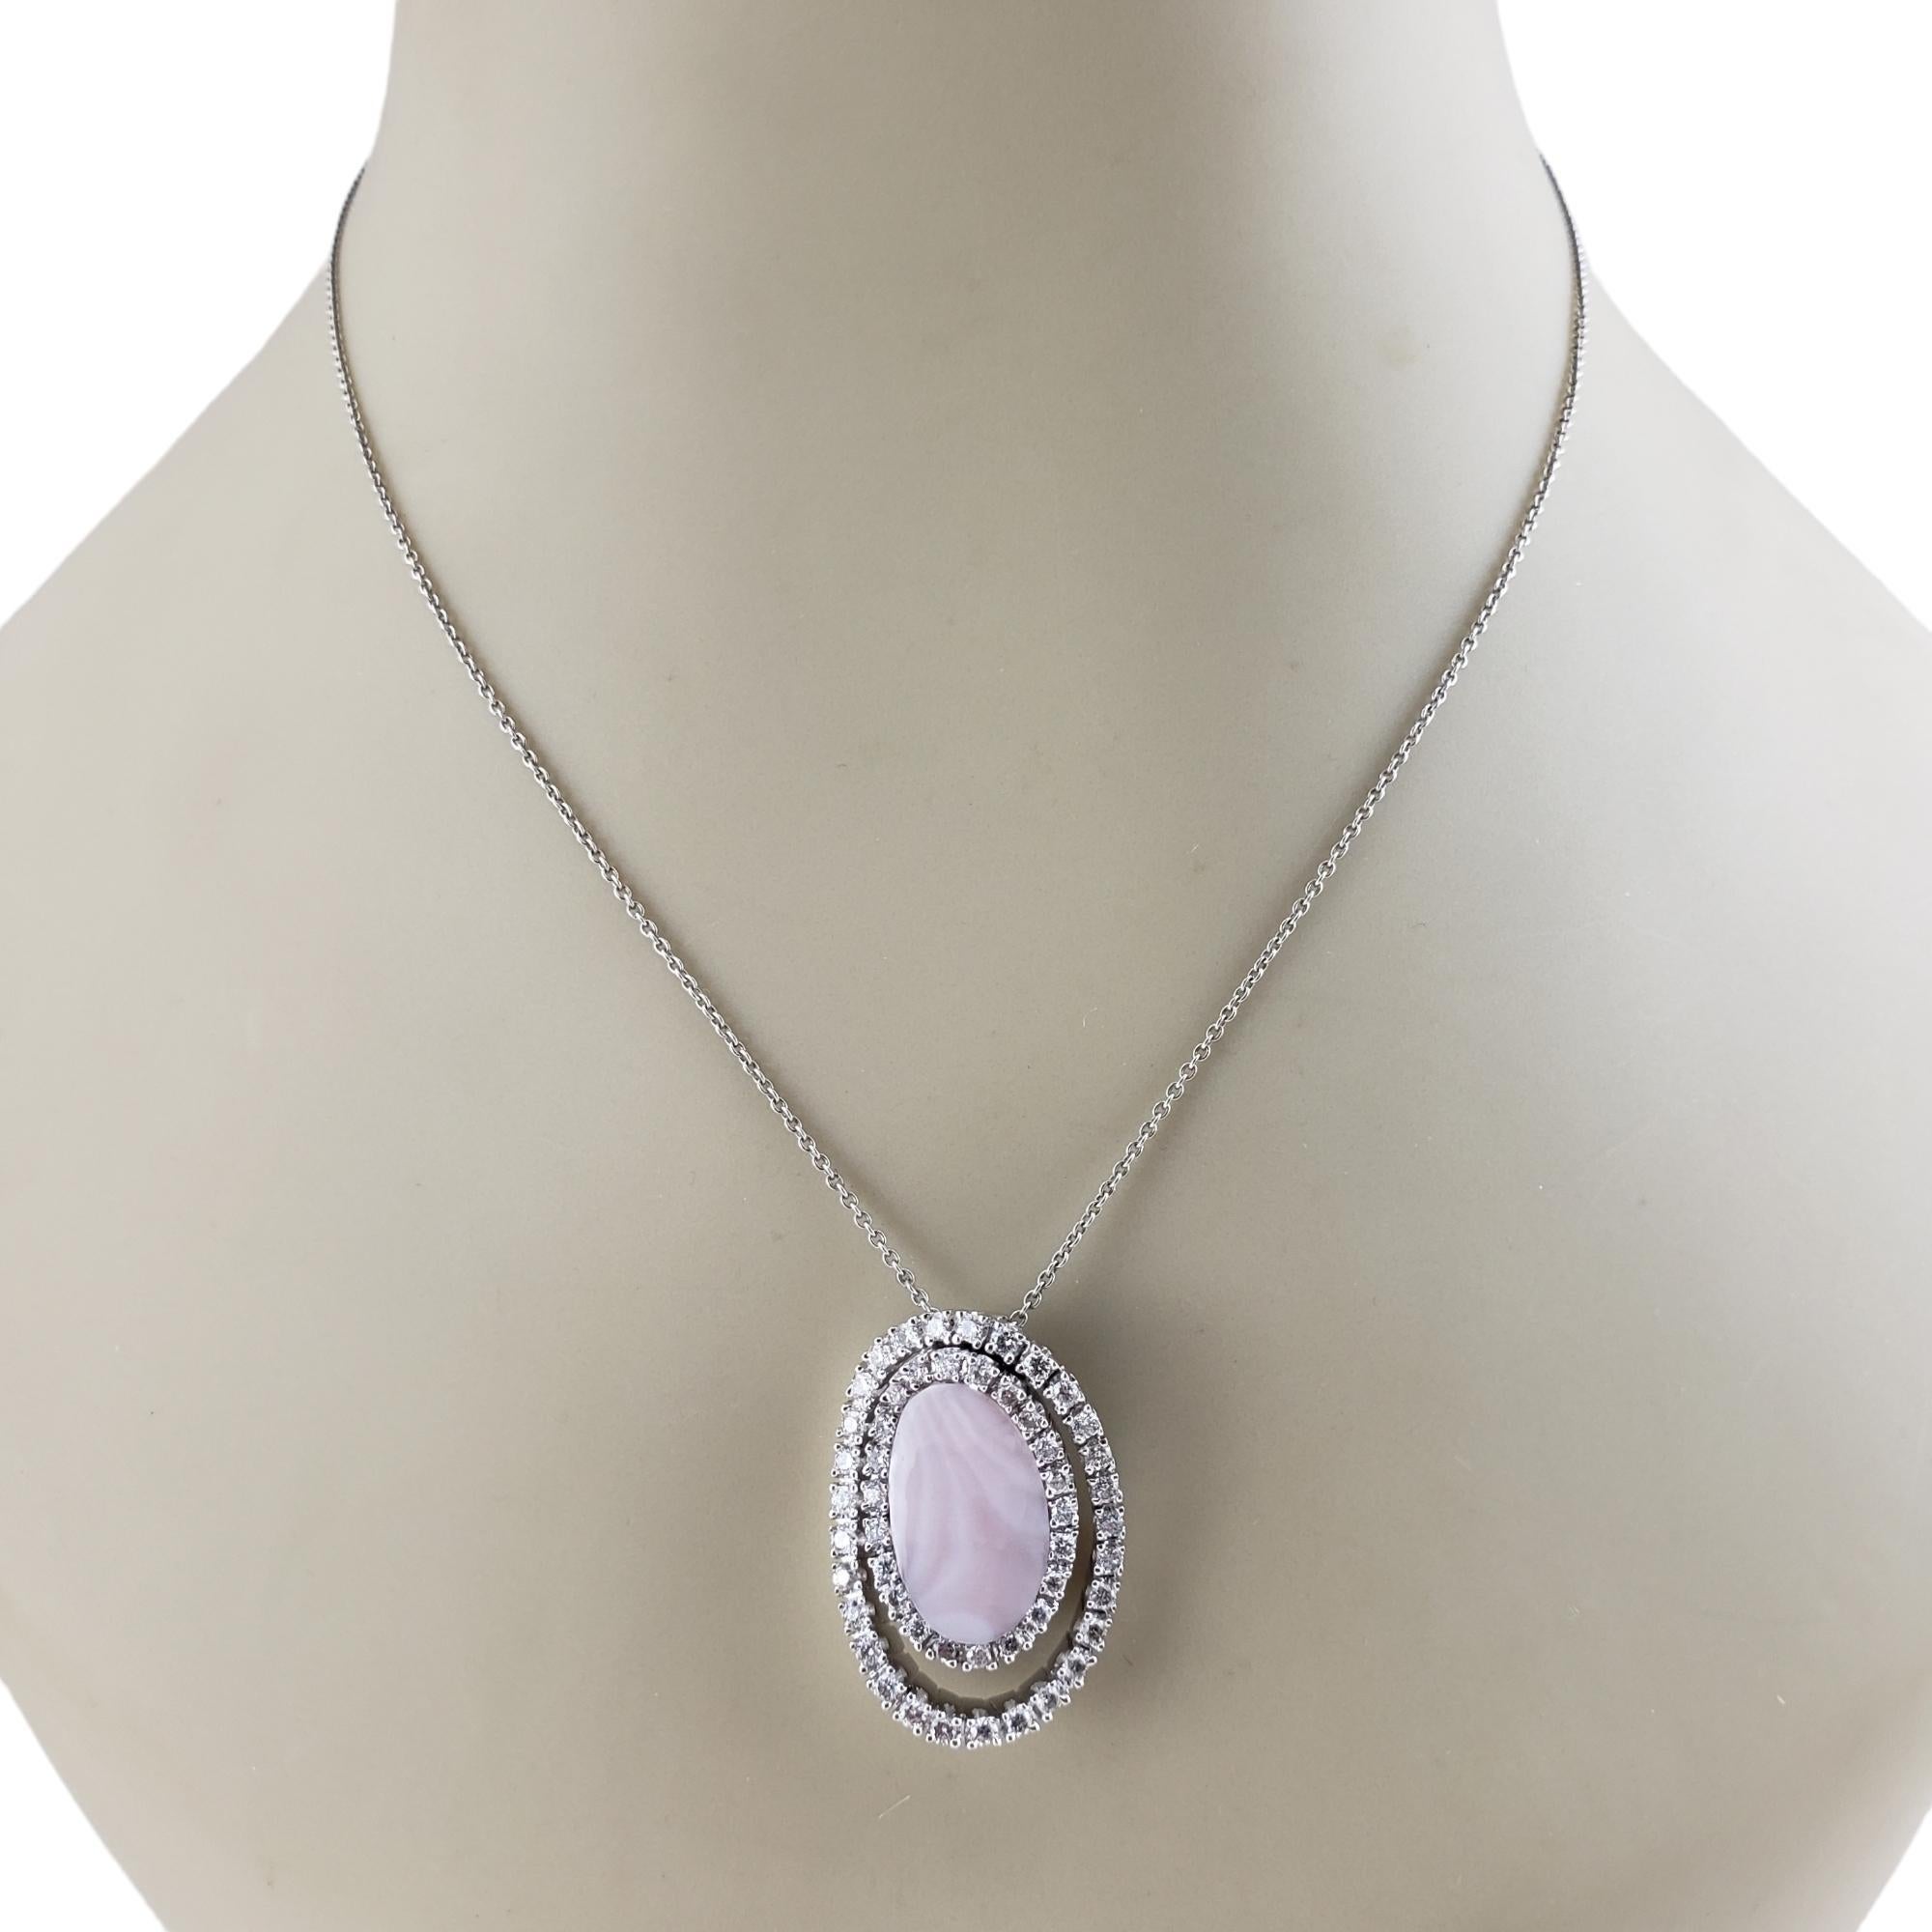 14K White Gold Mother of Pearl & Diamond Pendant #15766 For Sale 2